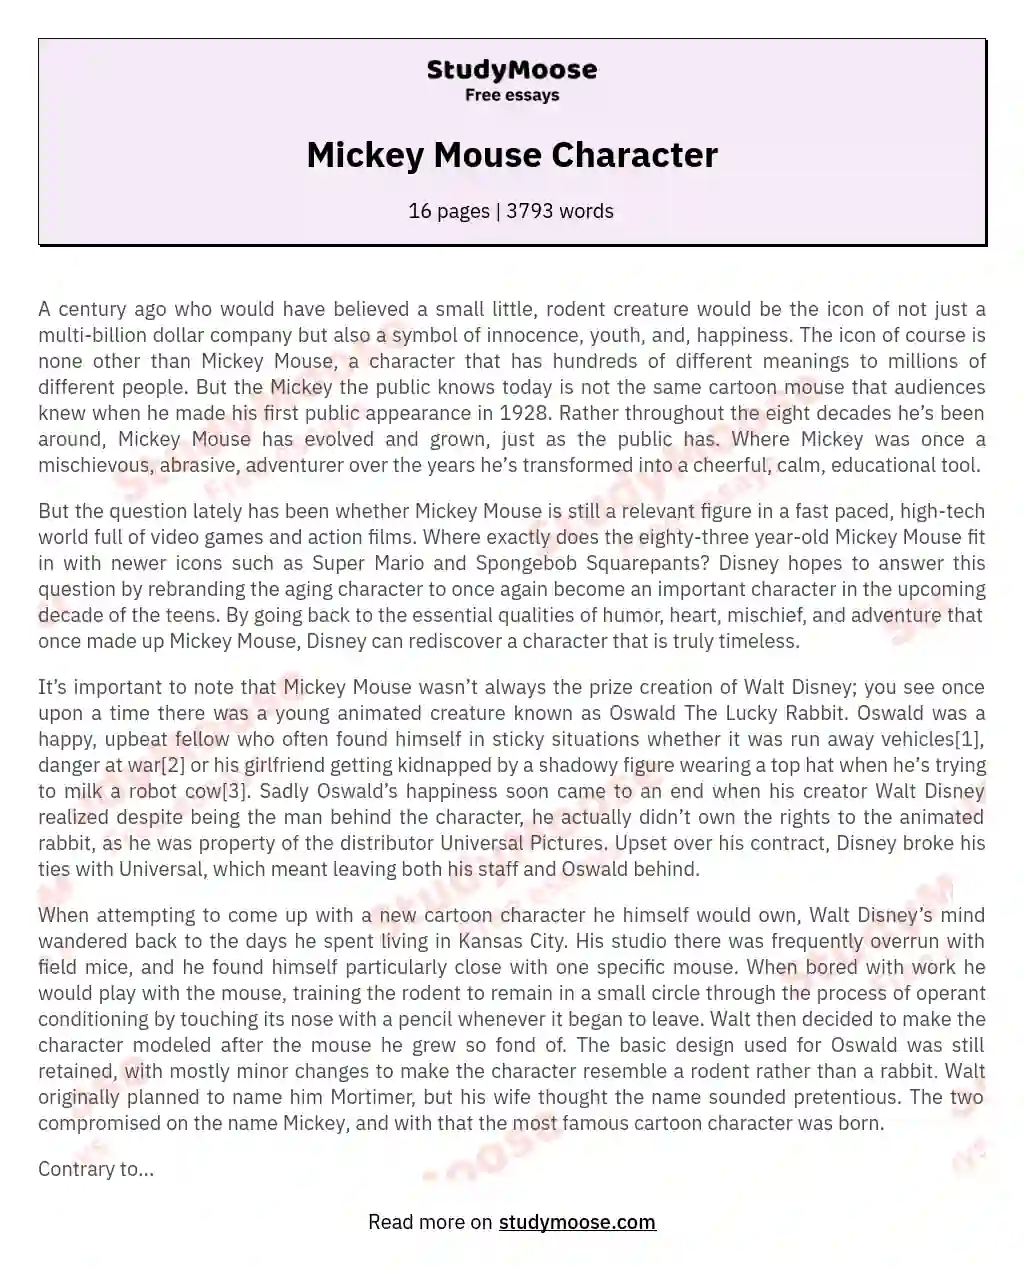 Mickey Mouse Character essay